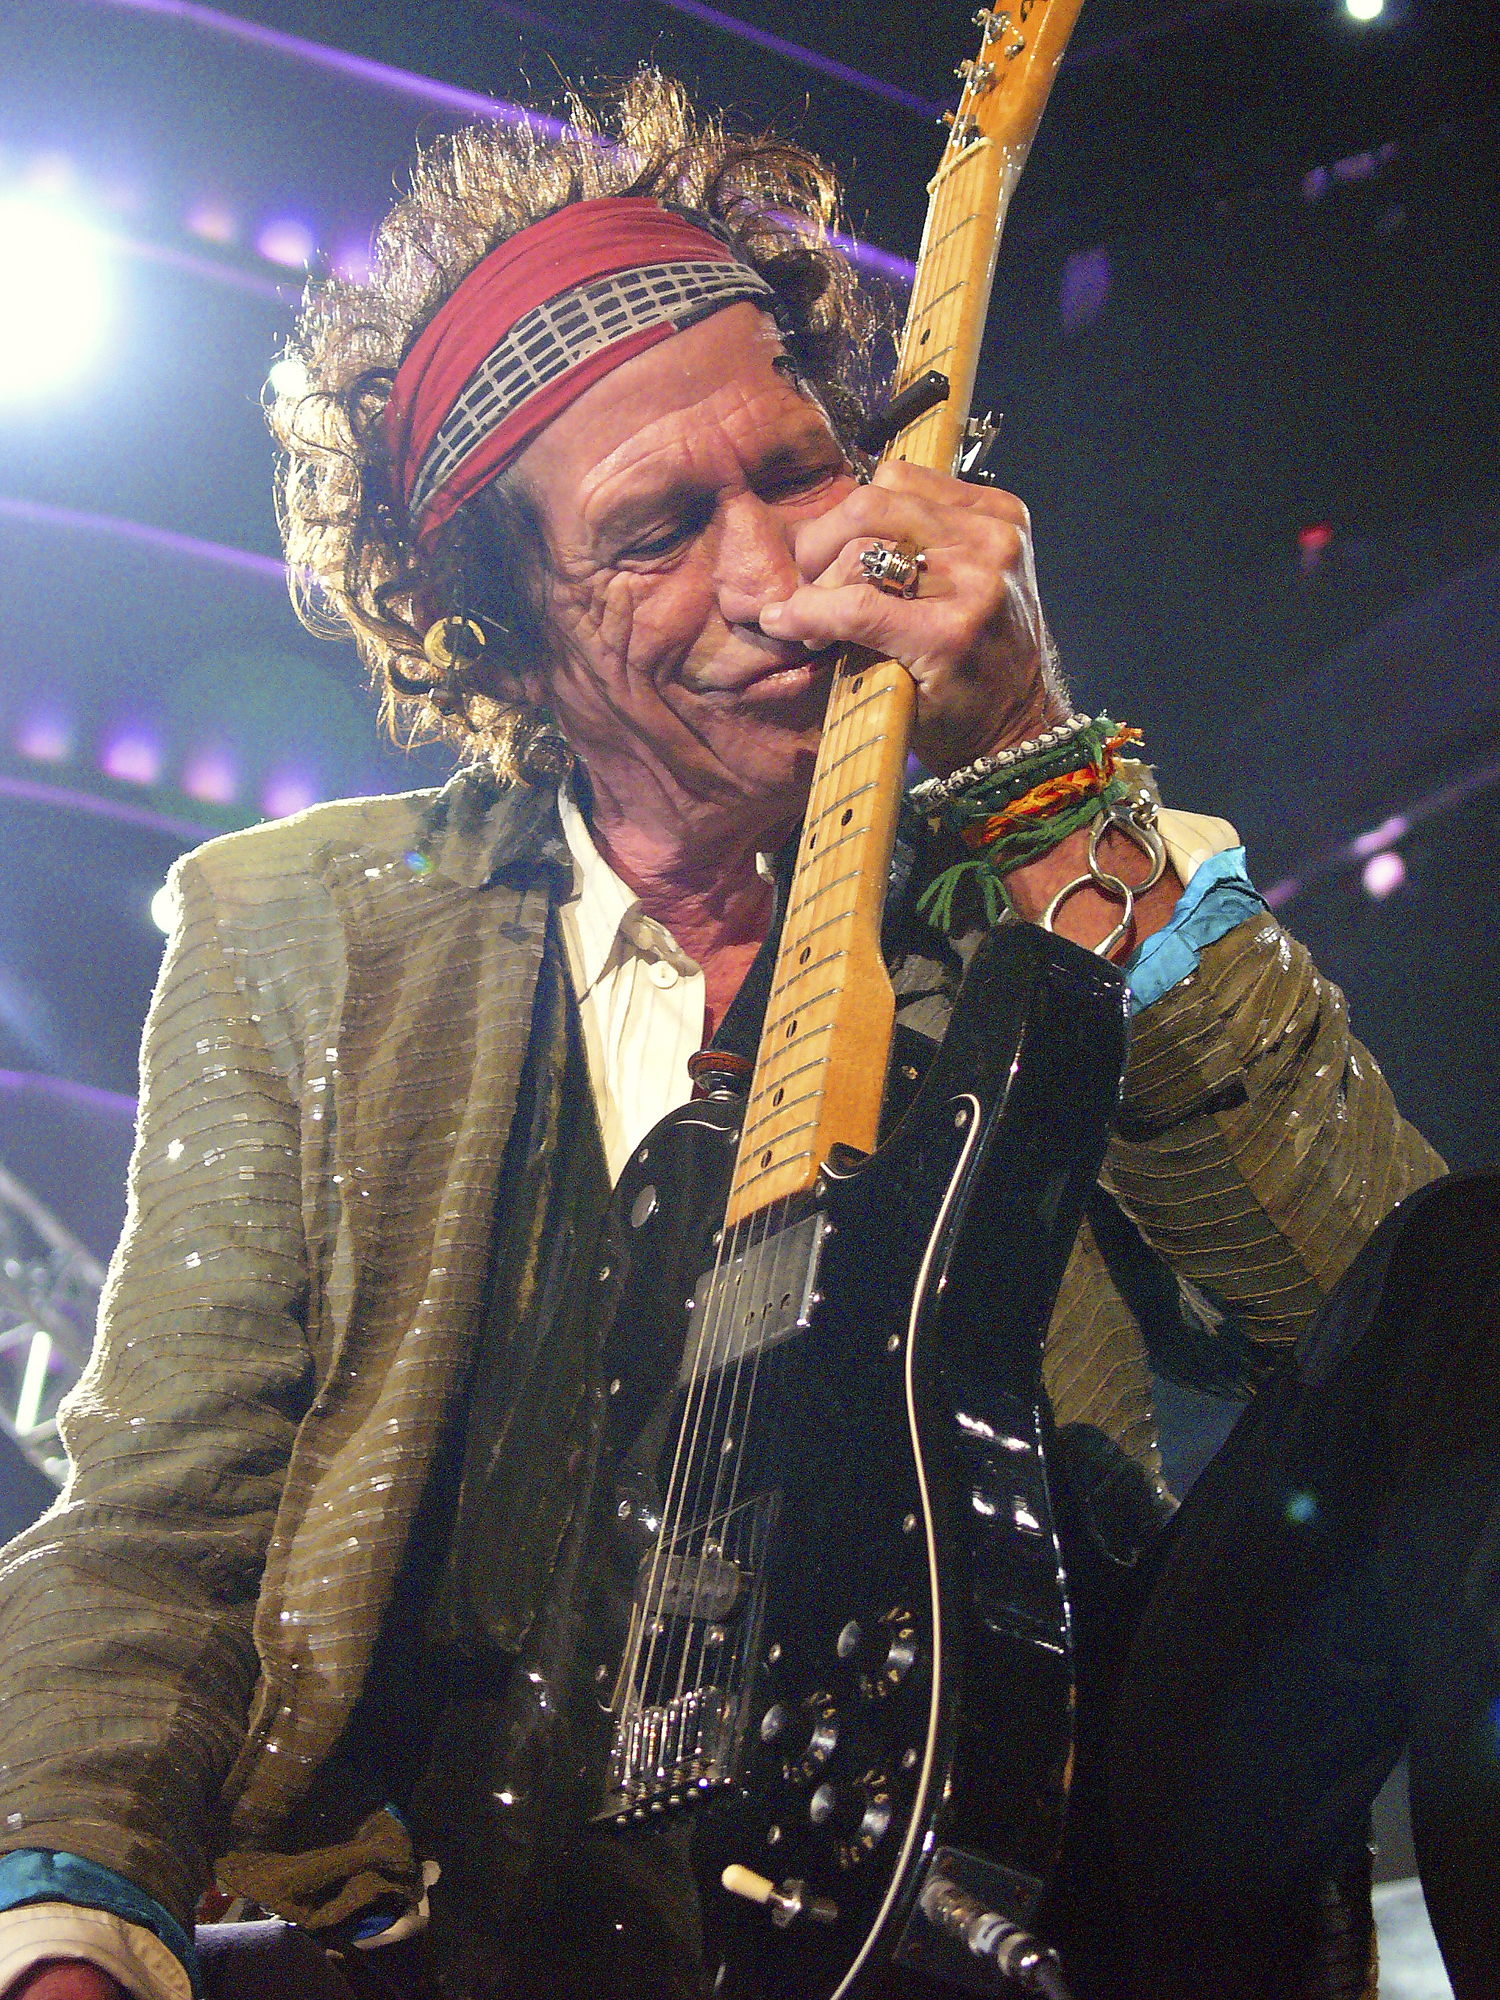 <small>Keith Richards takes the stage for the first of two sold-out Rolling Stones concerts in Regina in October, 2006. I’m a huge 
Stones fan so when the shows were announced  I immediately began inquiring about a press pass. Turns out the greatest rock 
and roll band on earth doesn’t need the Moose Jaw Times-Herald (where I was working at the time) for publicity. But I kept calling 
and after a few weeks, the promoter got back and said, “If I get you a press pass, will you stop calling me?” Deal. Before the show, 
everyone with  a press pass had to gather in a special area behind the stage. When the lights finally dimmed, we were escorted 
out towards our spots. Seeing our silhouettes approaching the stage, the crowd briefly thought we were the Stones and let out 
a massive roar. Keith himself has said that feeling is better than any drug he’s ever tried. Getting to experience that feeling myself, 
if only for a second, and this moment when Keith came so close I could smell him, has been the highlight of my career so far.
</small>